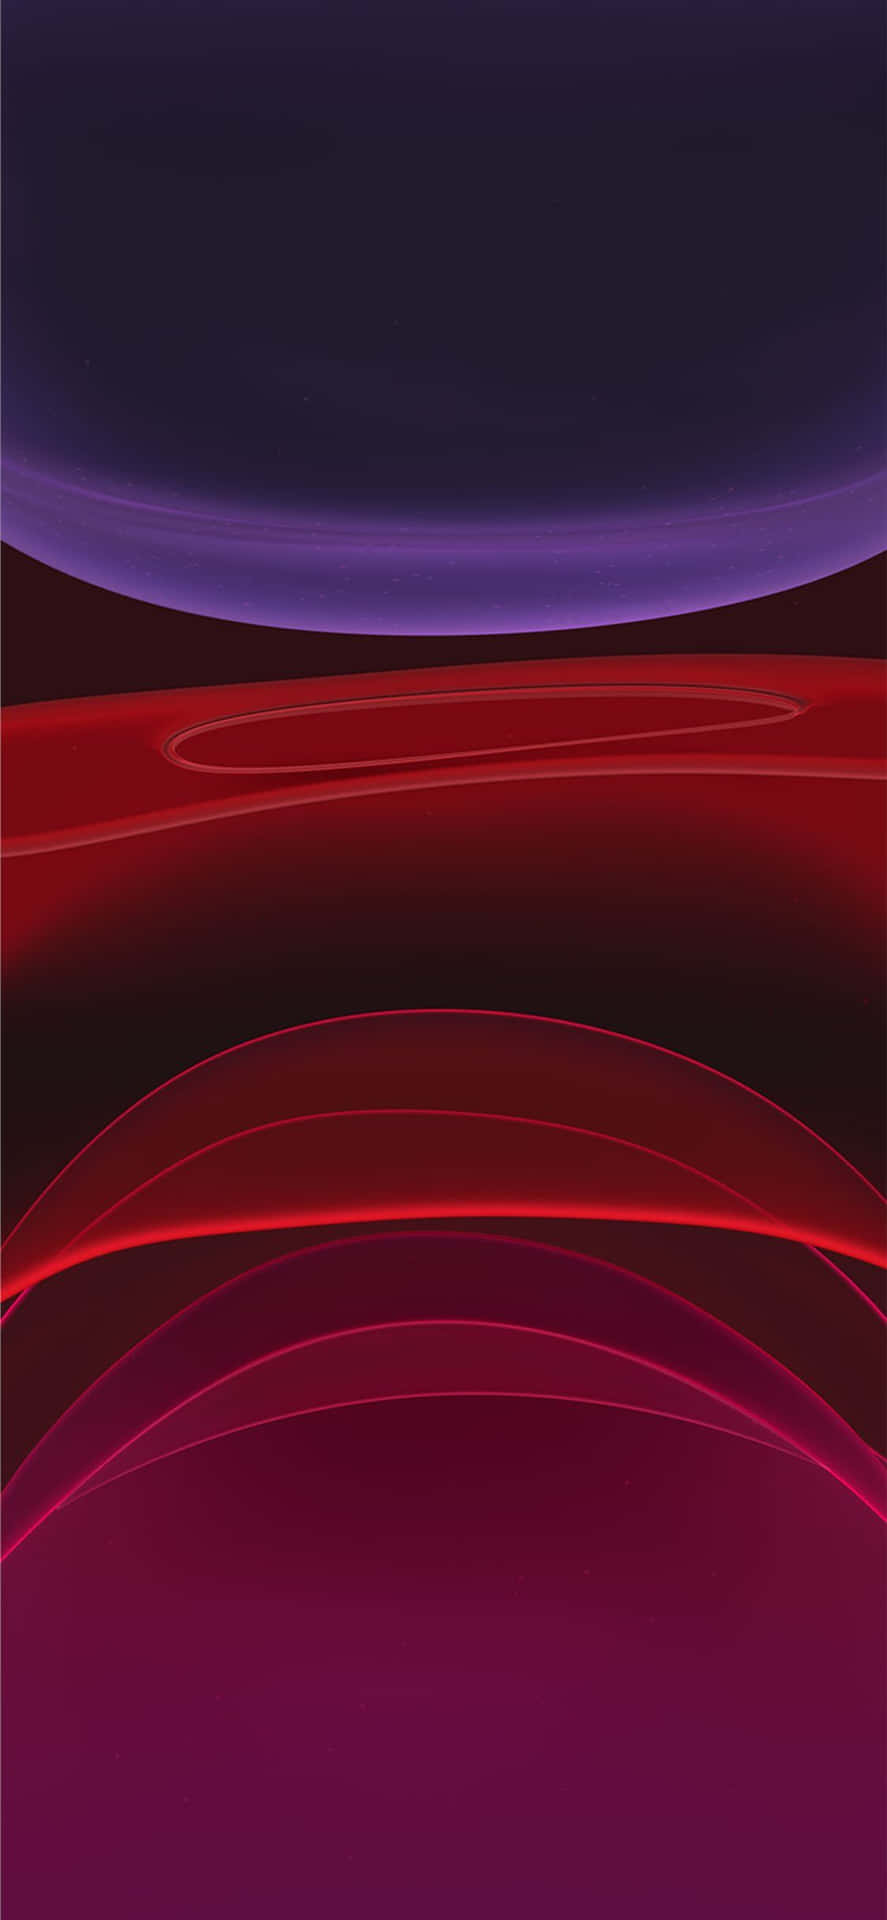 A Red And Purple Abstract Background Wallpaper